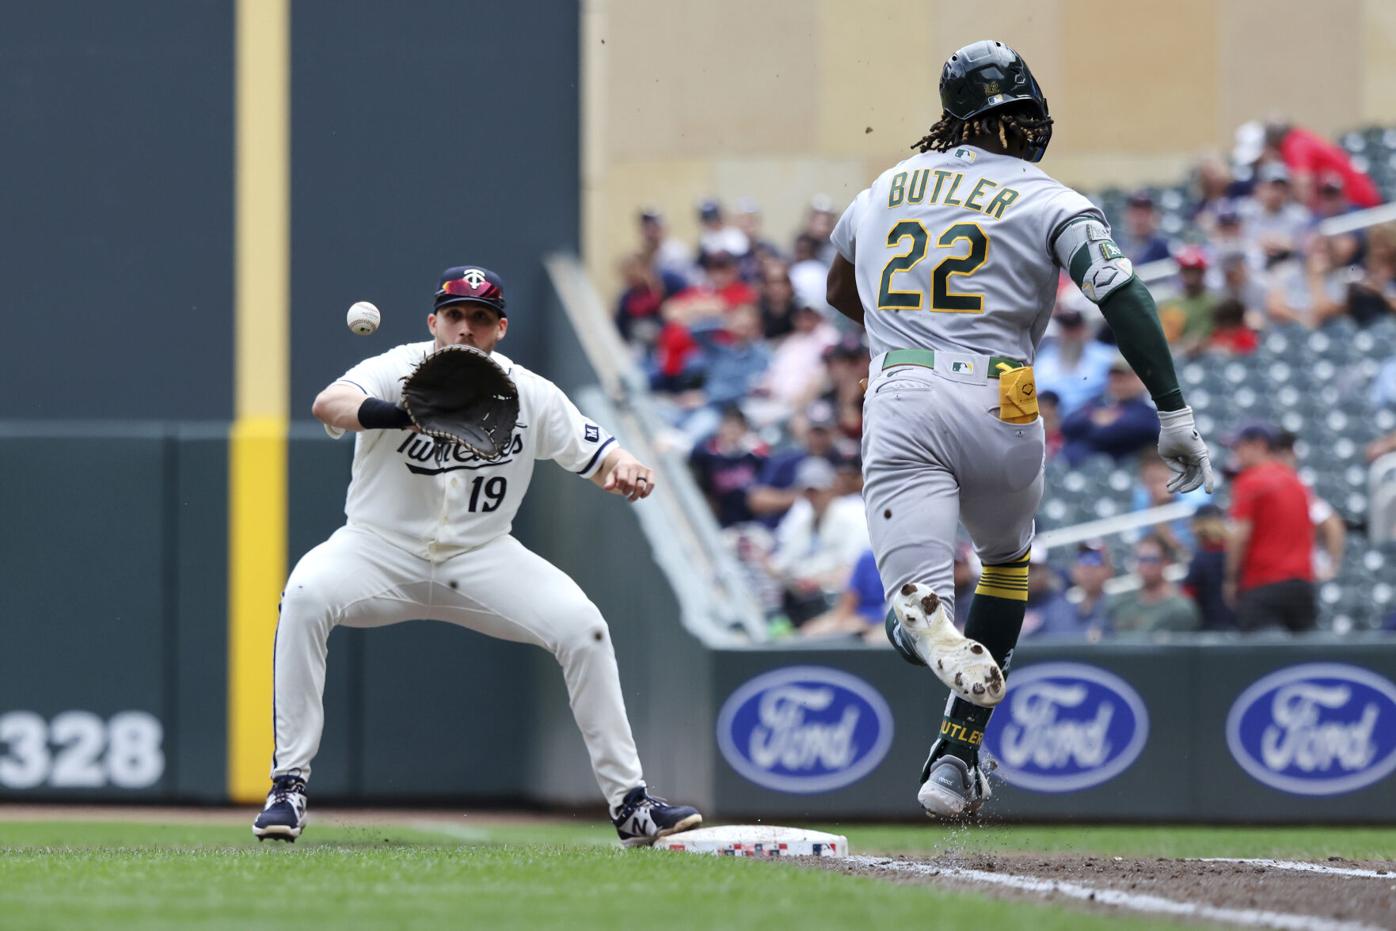 Alex Kirilloff, Twins come from behind to sweep A's